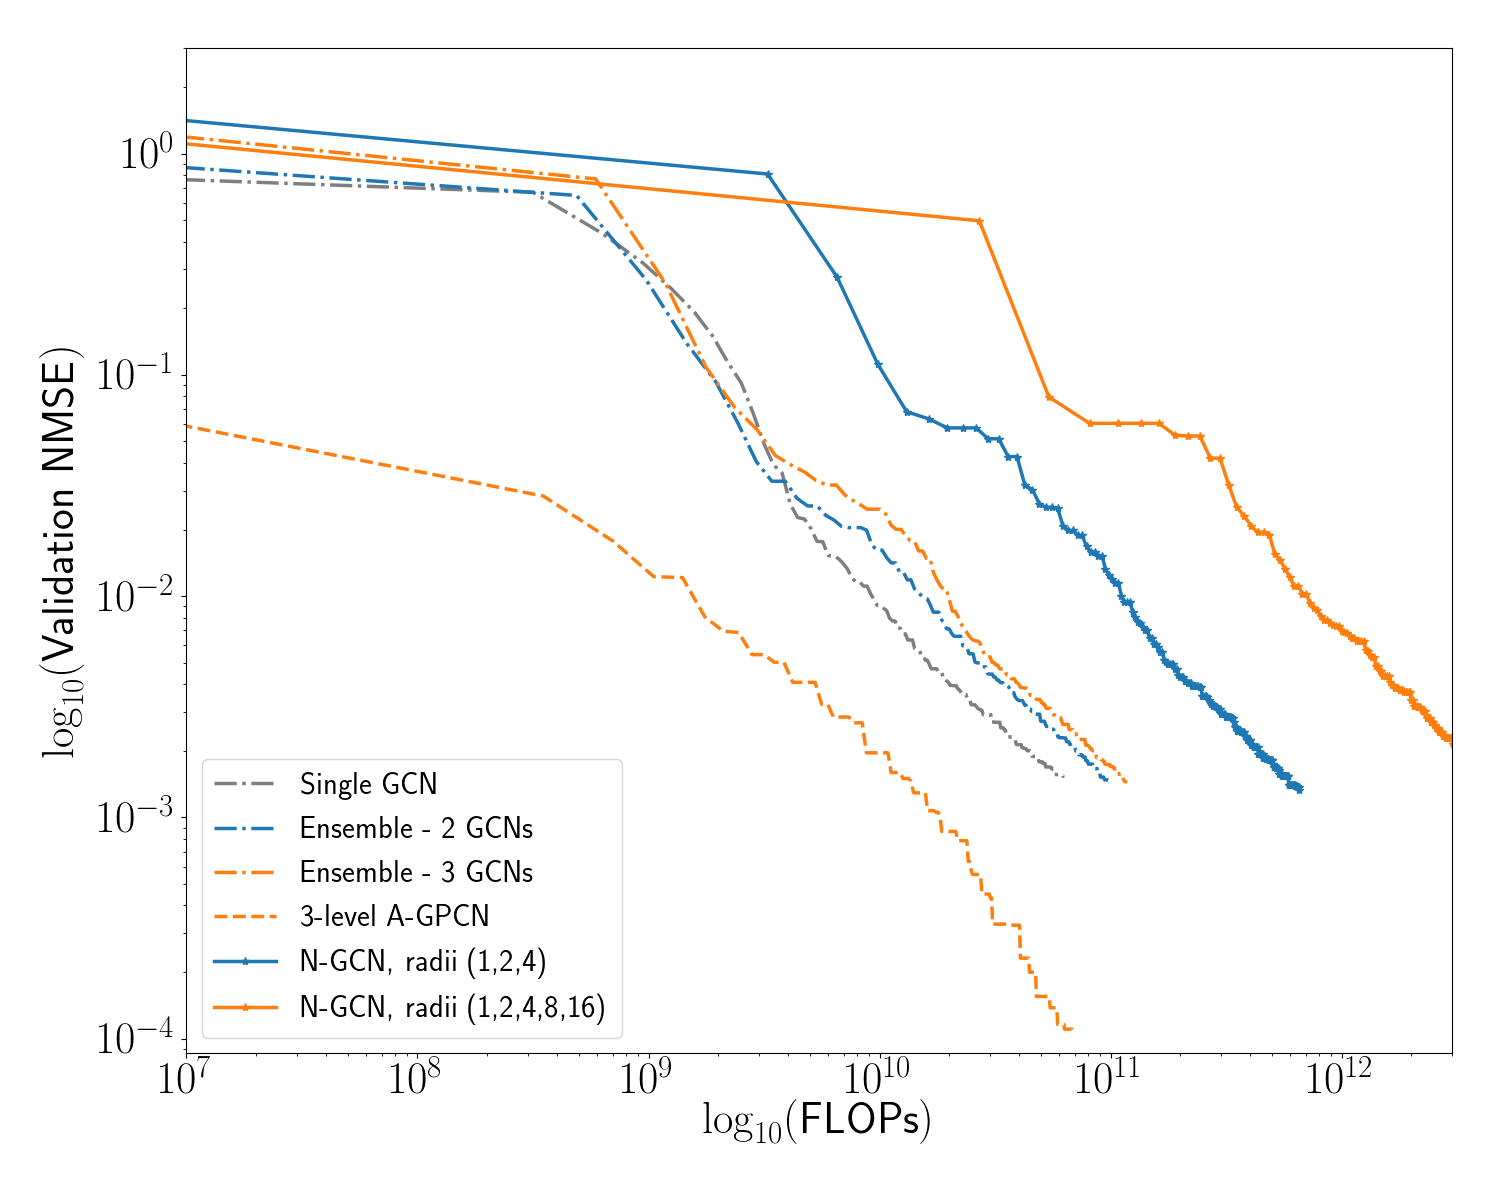 Comparison of Normalized MSE on held-out validation data as a function of FLOPs expended for a variety of ensemble Graph Convolutional Network Models. Plotted error is is the minimum validation error of the model over training thus far. We see that especially in early stages of training, our model formulation learns faster (e.g. requires fewer FLOPs) than an ensemble of 2, 3 or 5 GCNs with the same number of filters. 